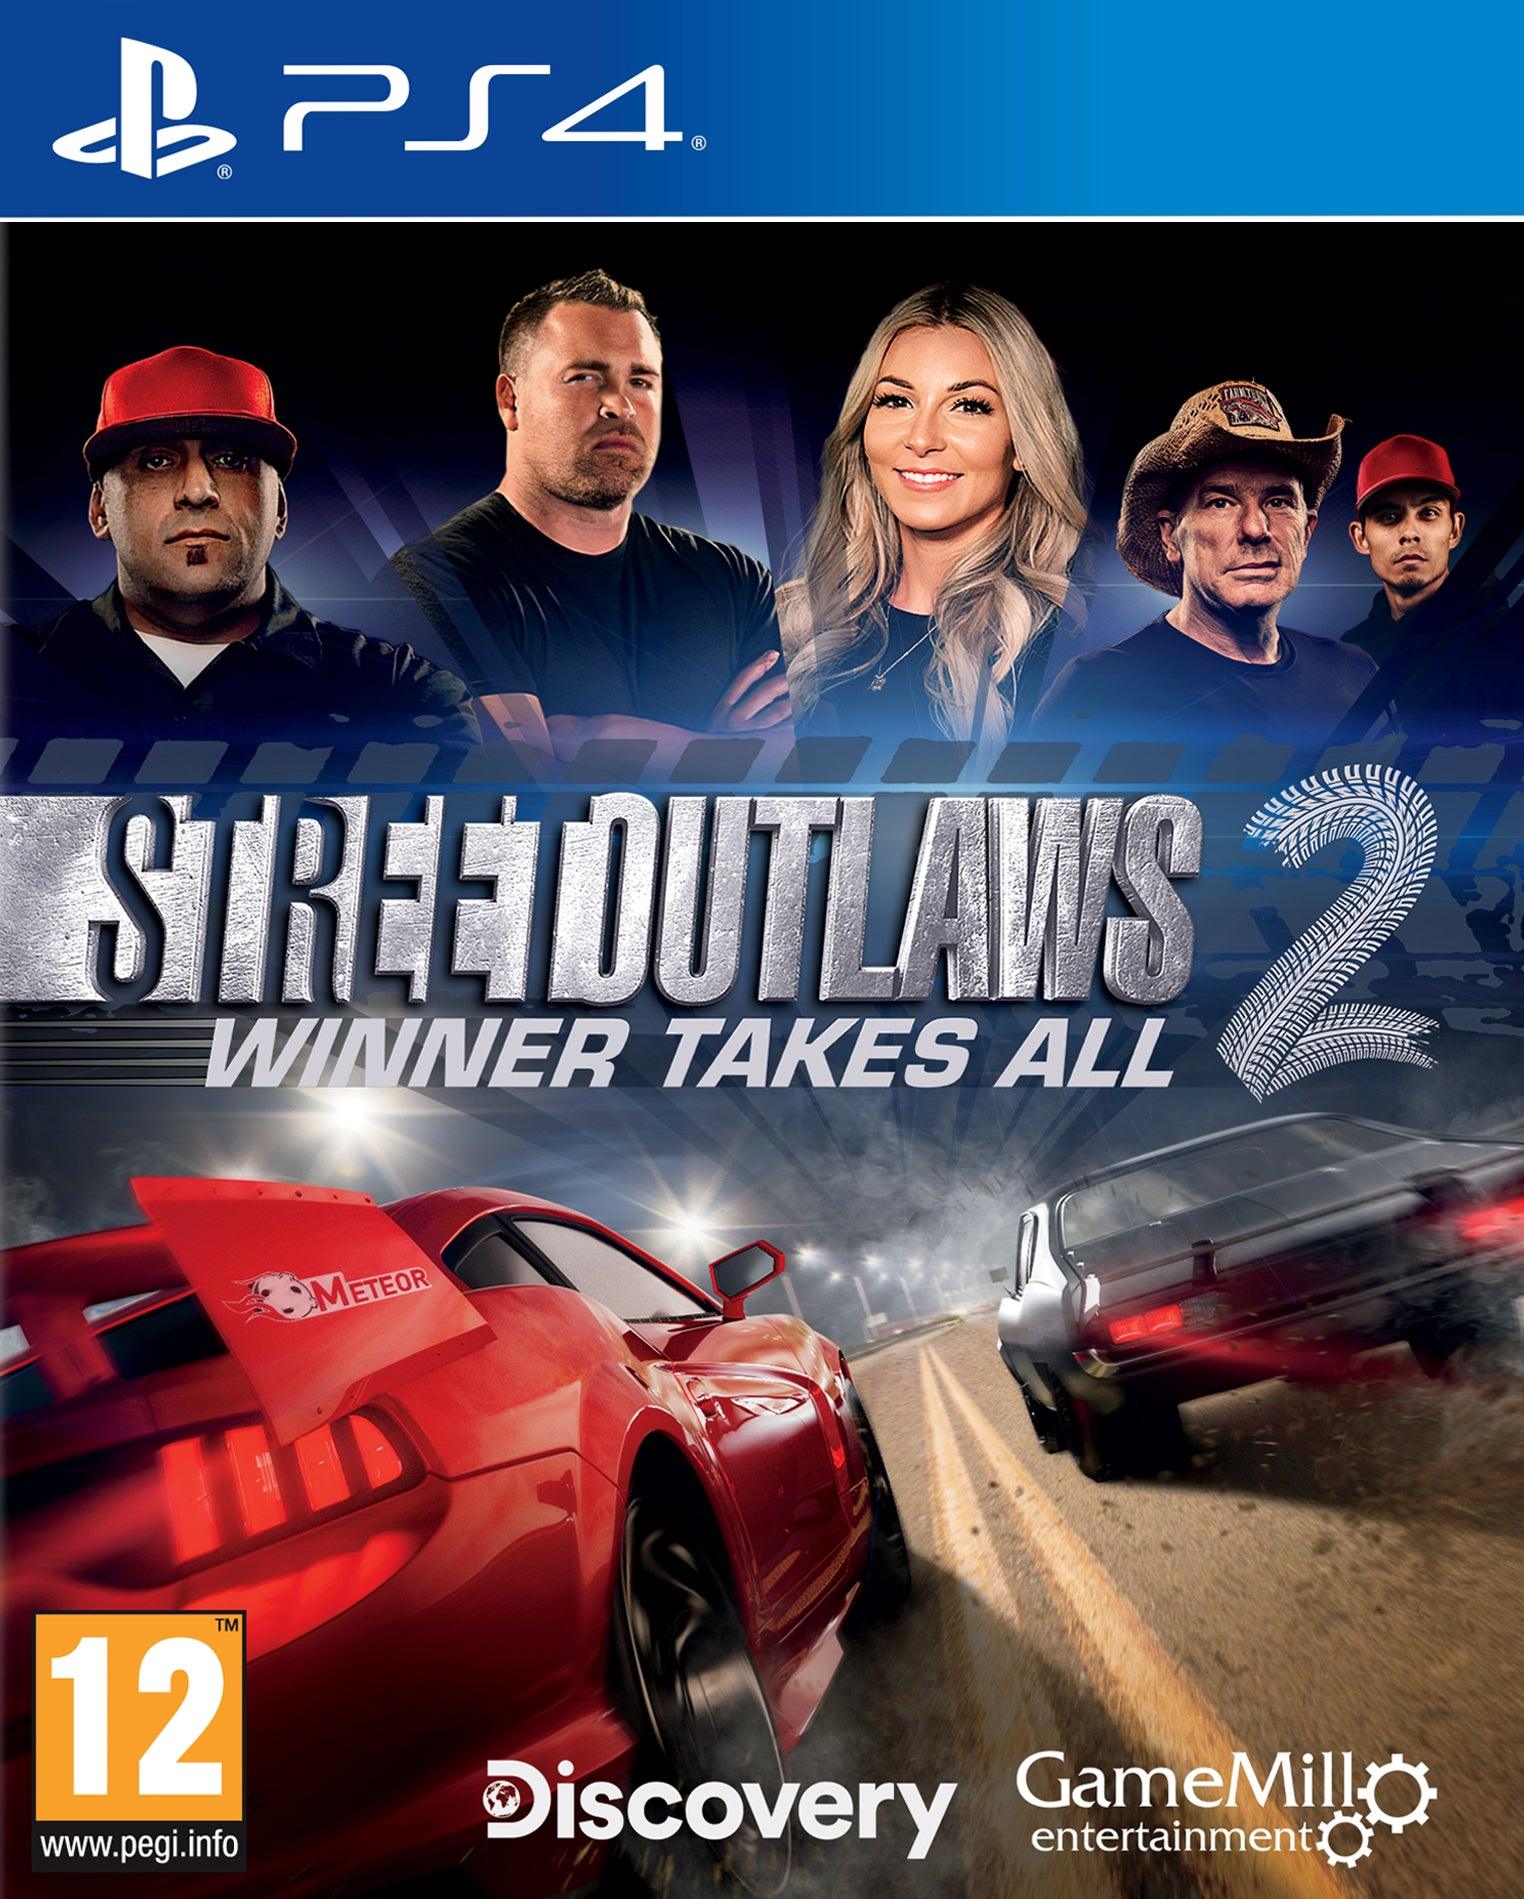 Street Outlaws 2 Winner Takes - Want a New Gadget